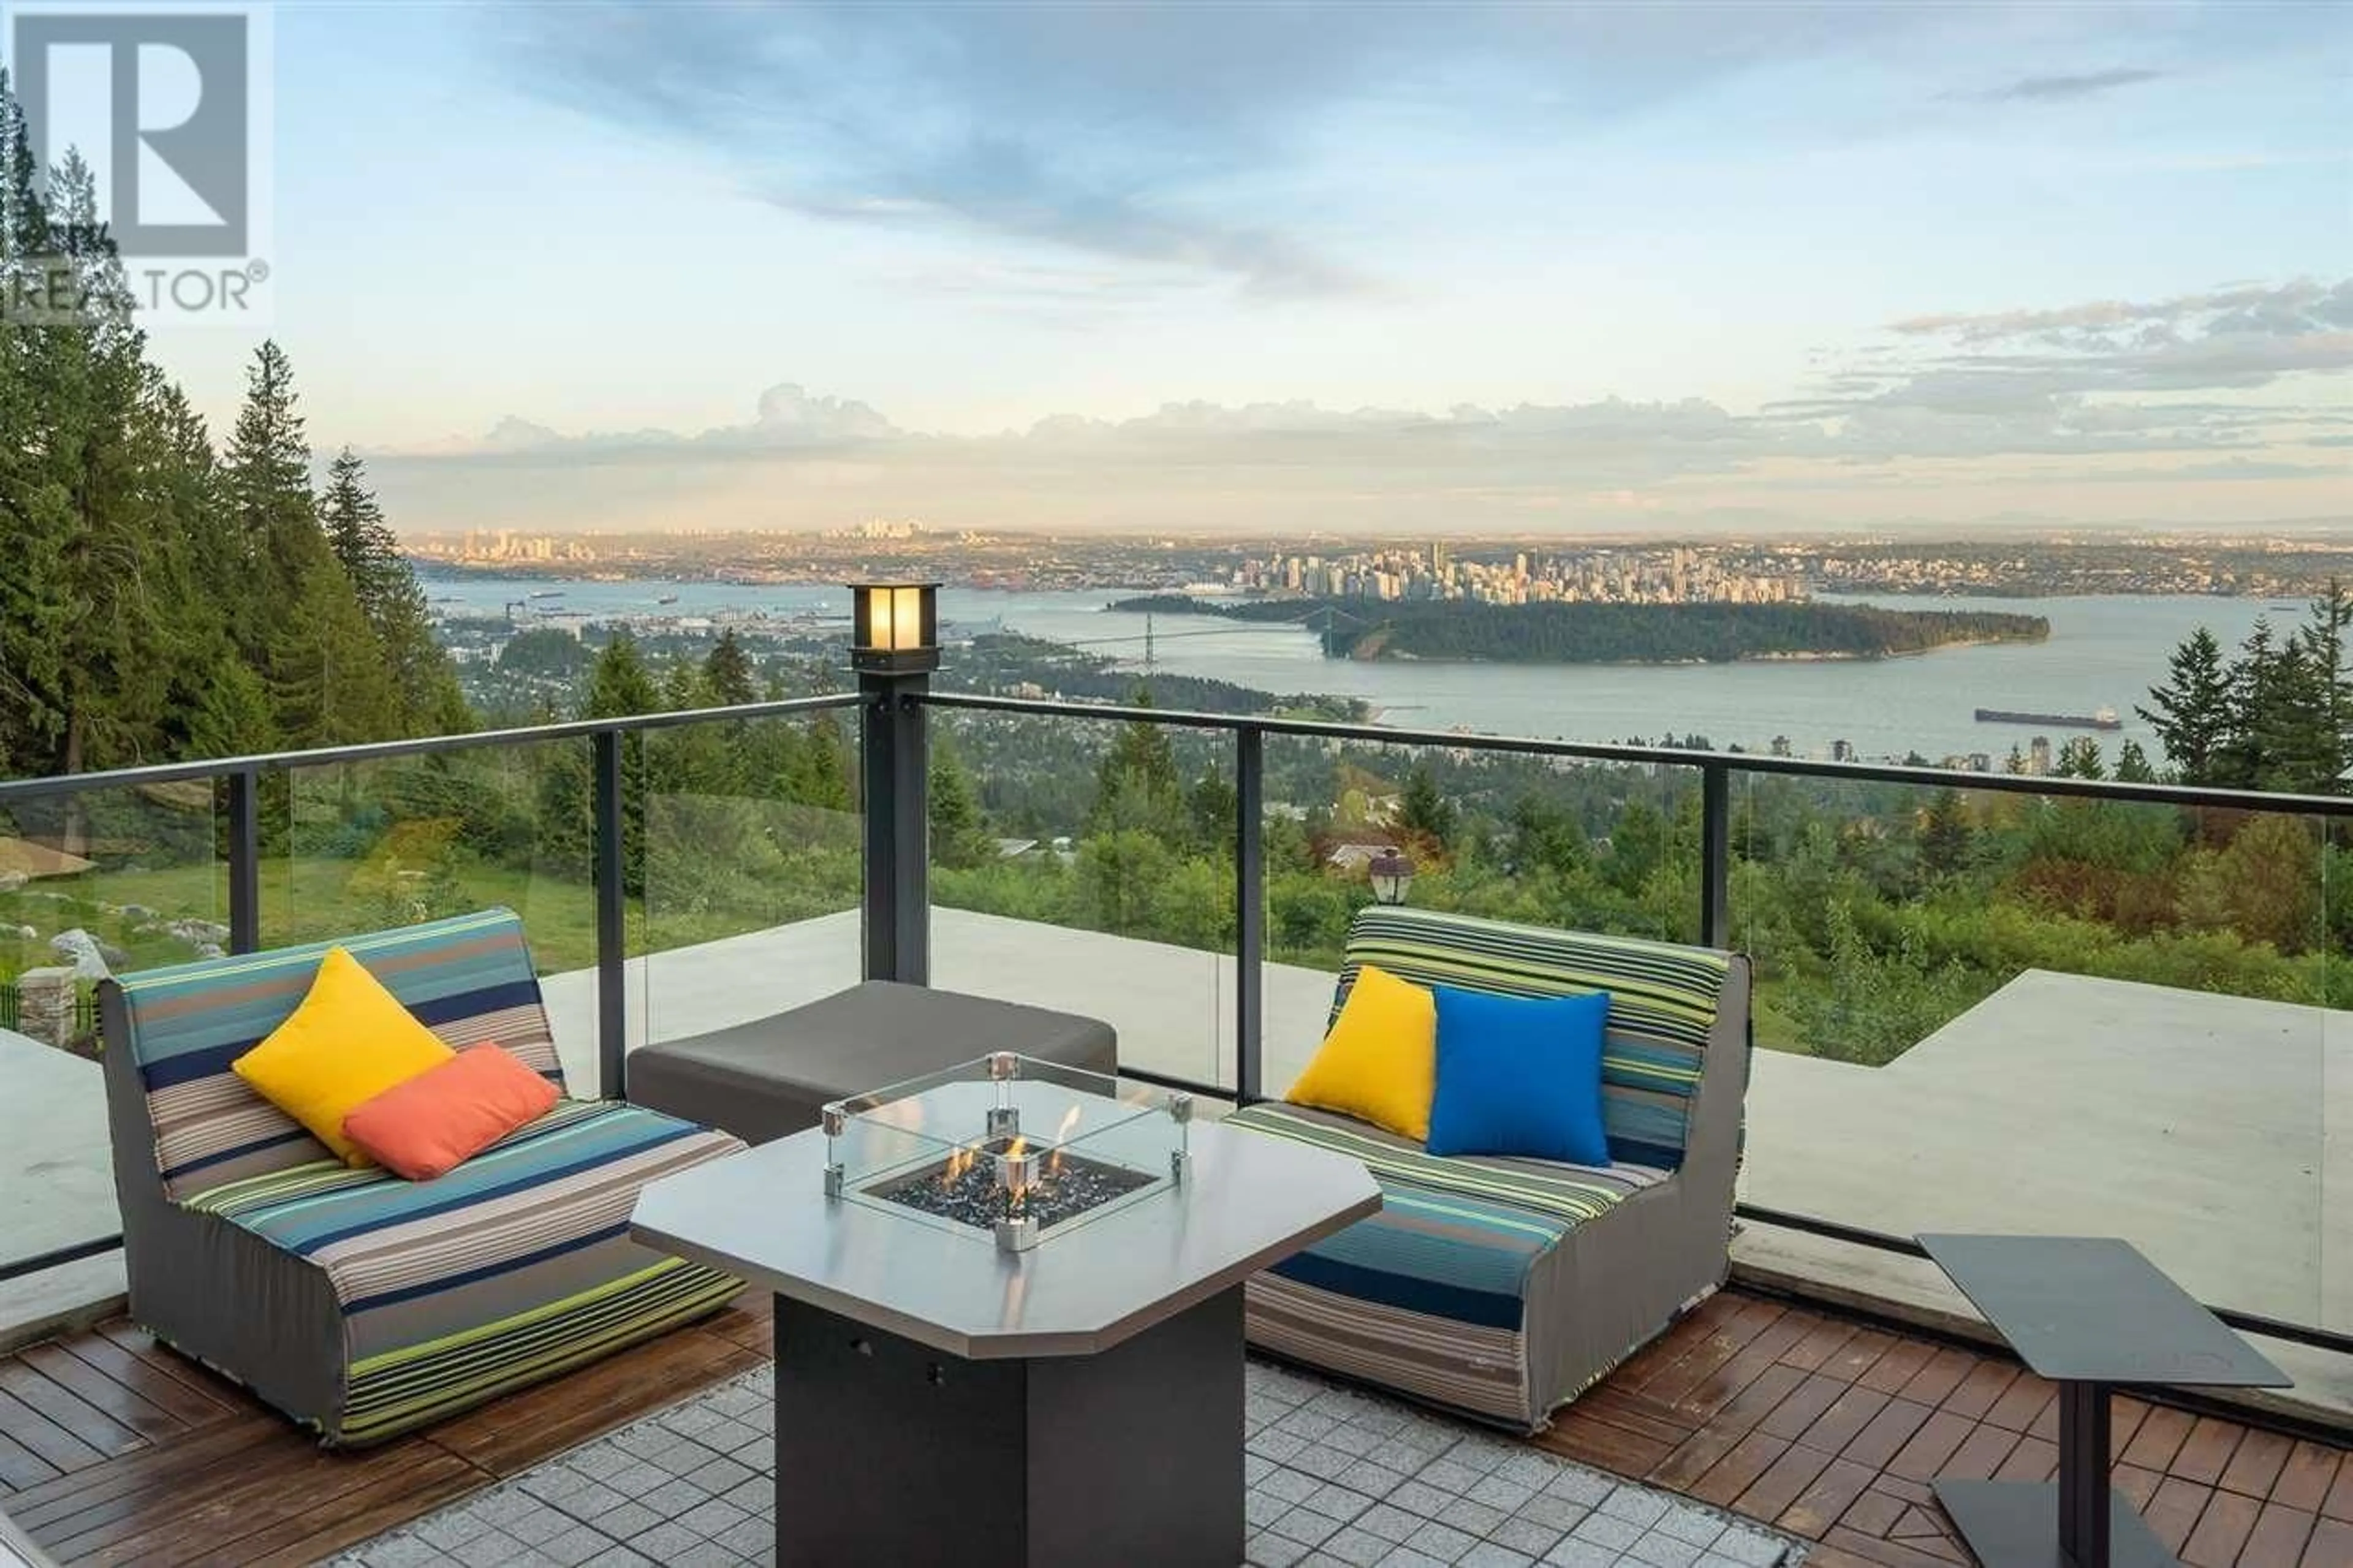 Patio for 302 2275 TWIN CREEK PLACE, West Vancouver British Columbia V7S3K4